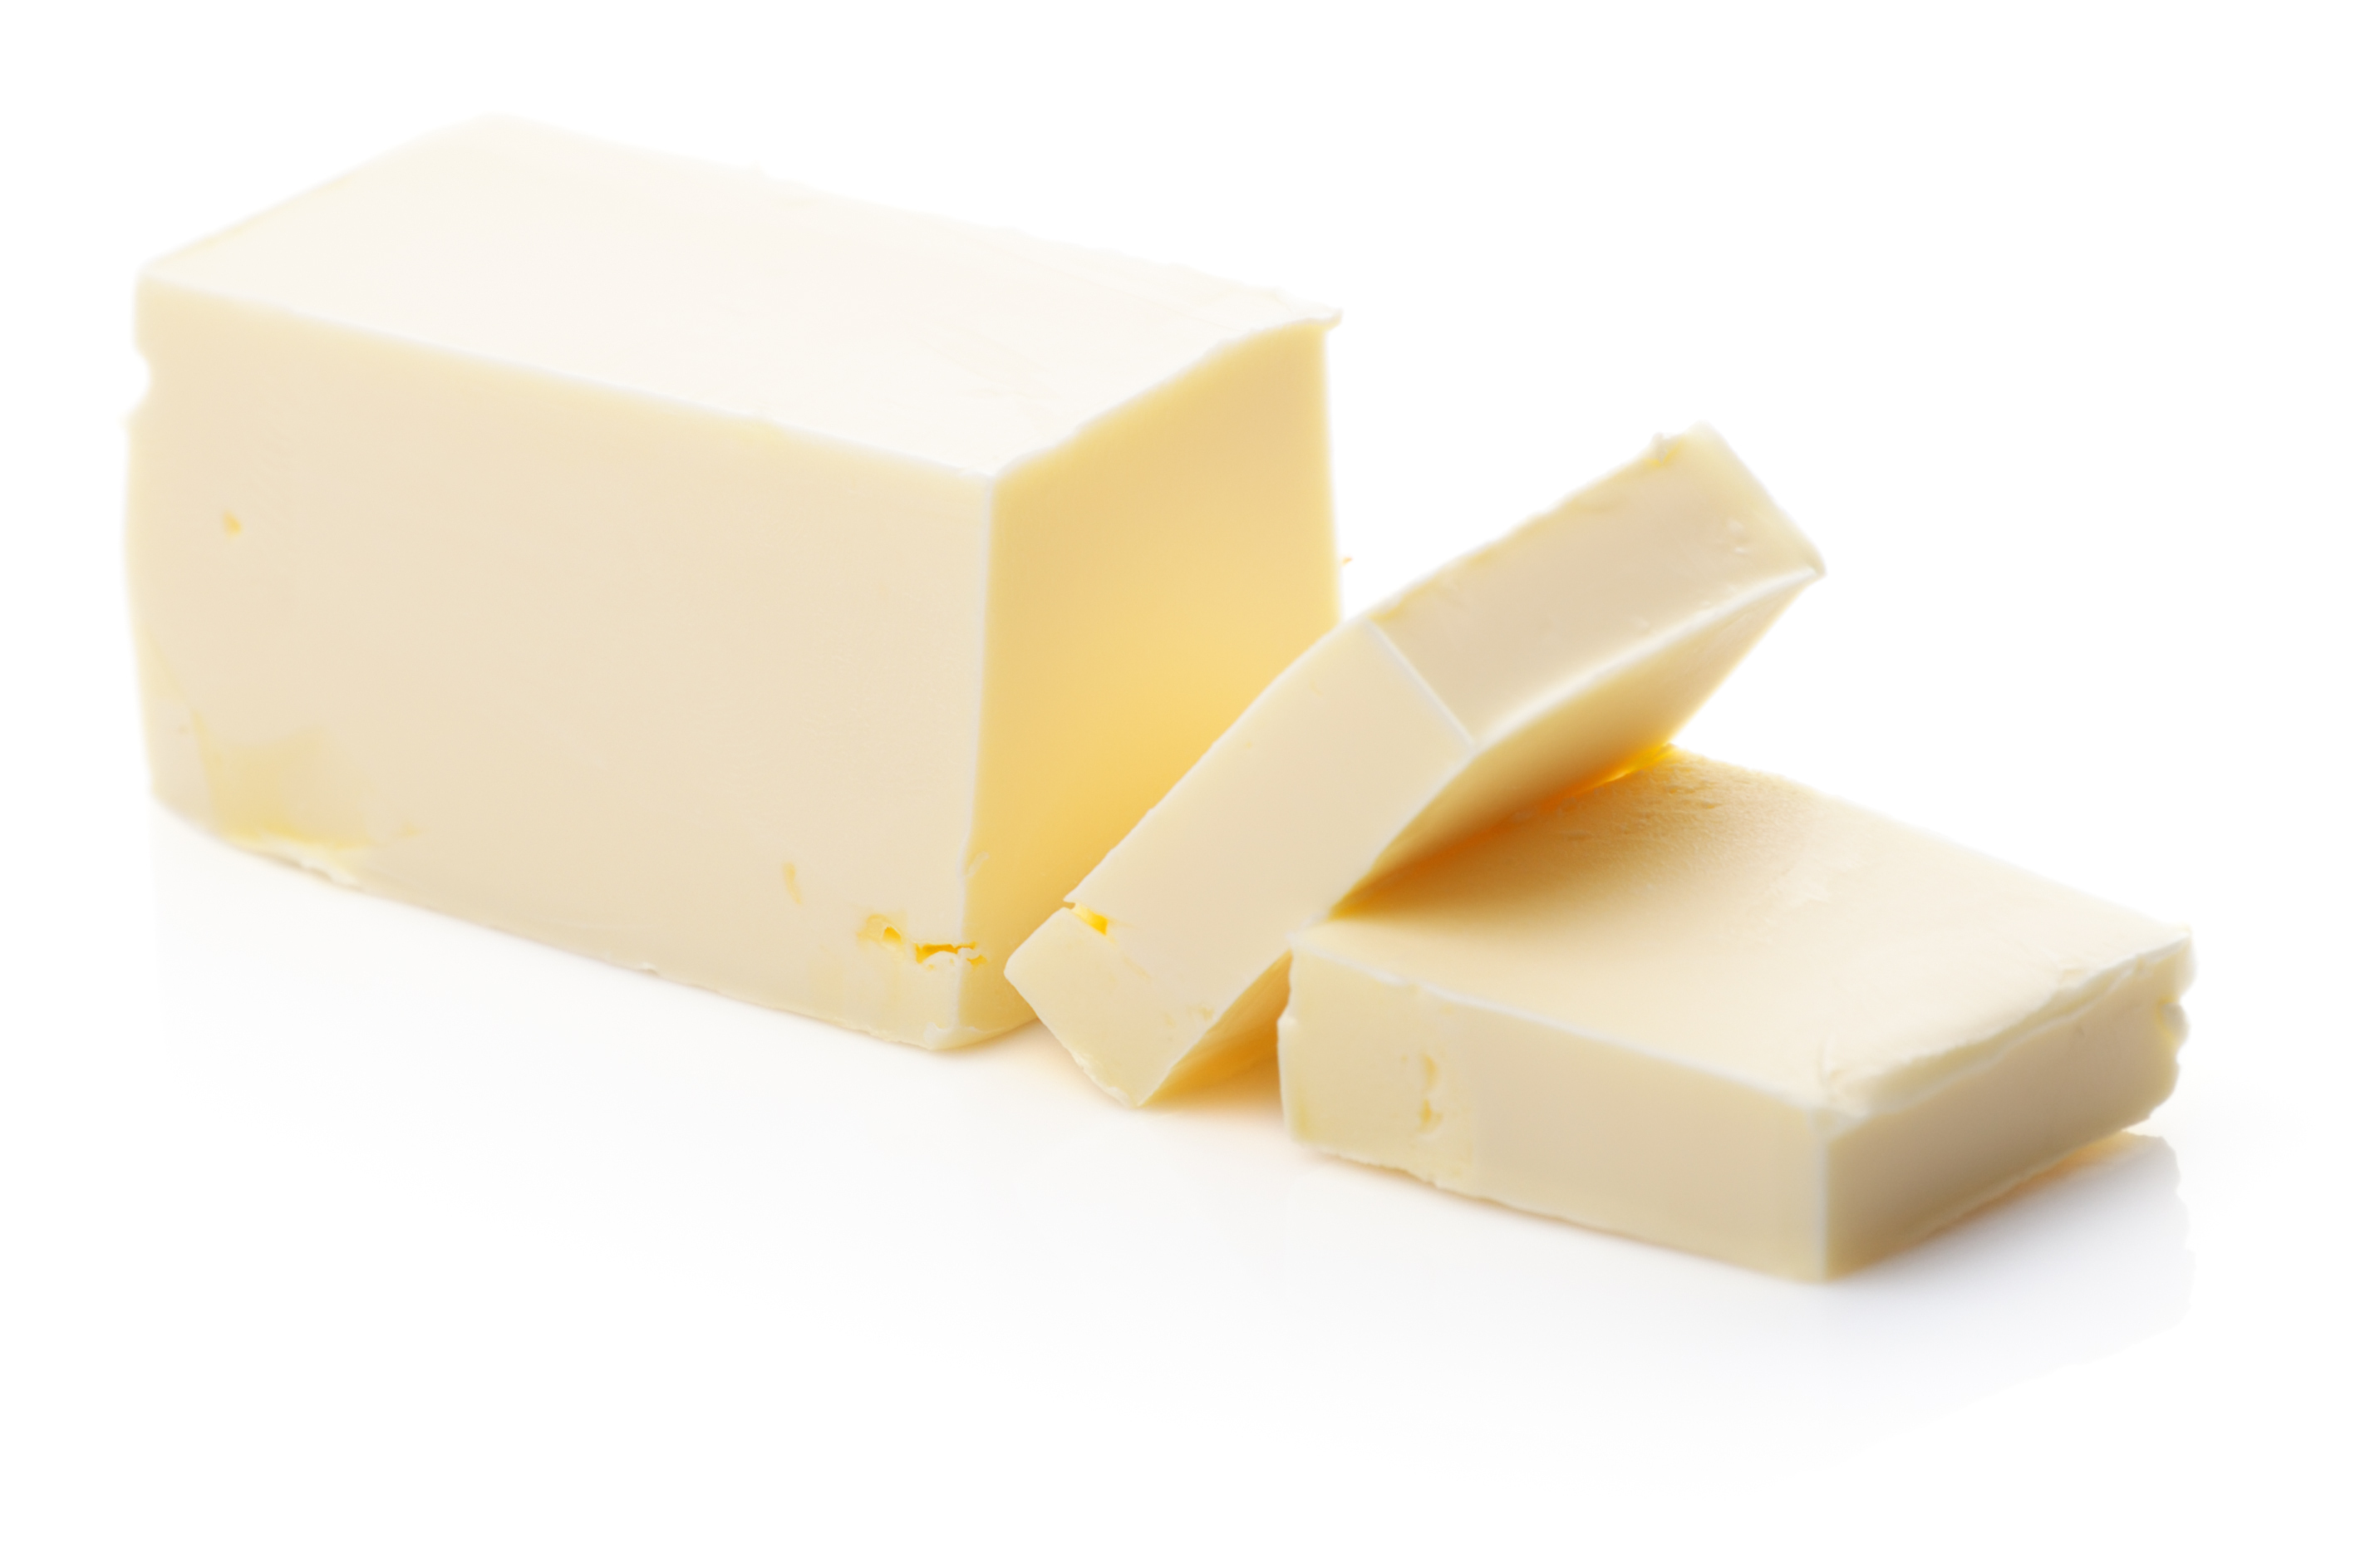 The role of butter in our col